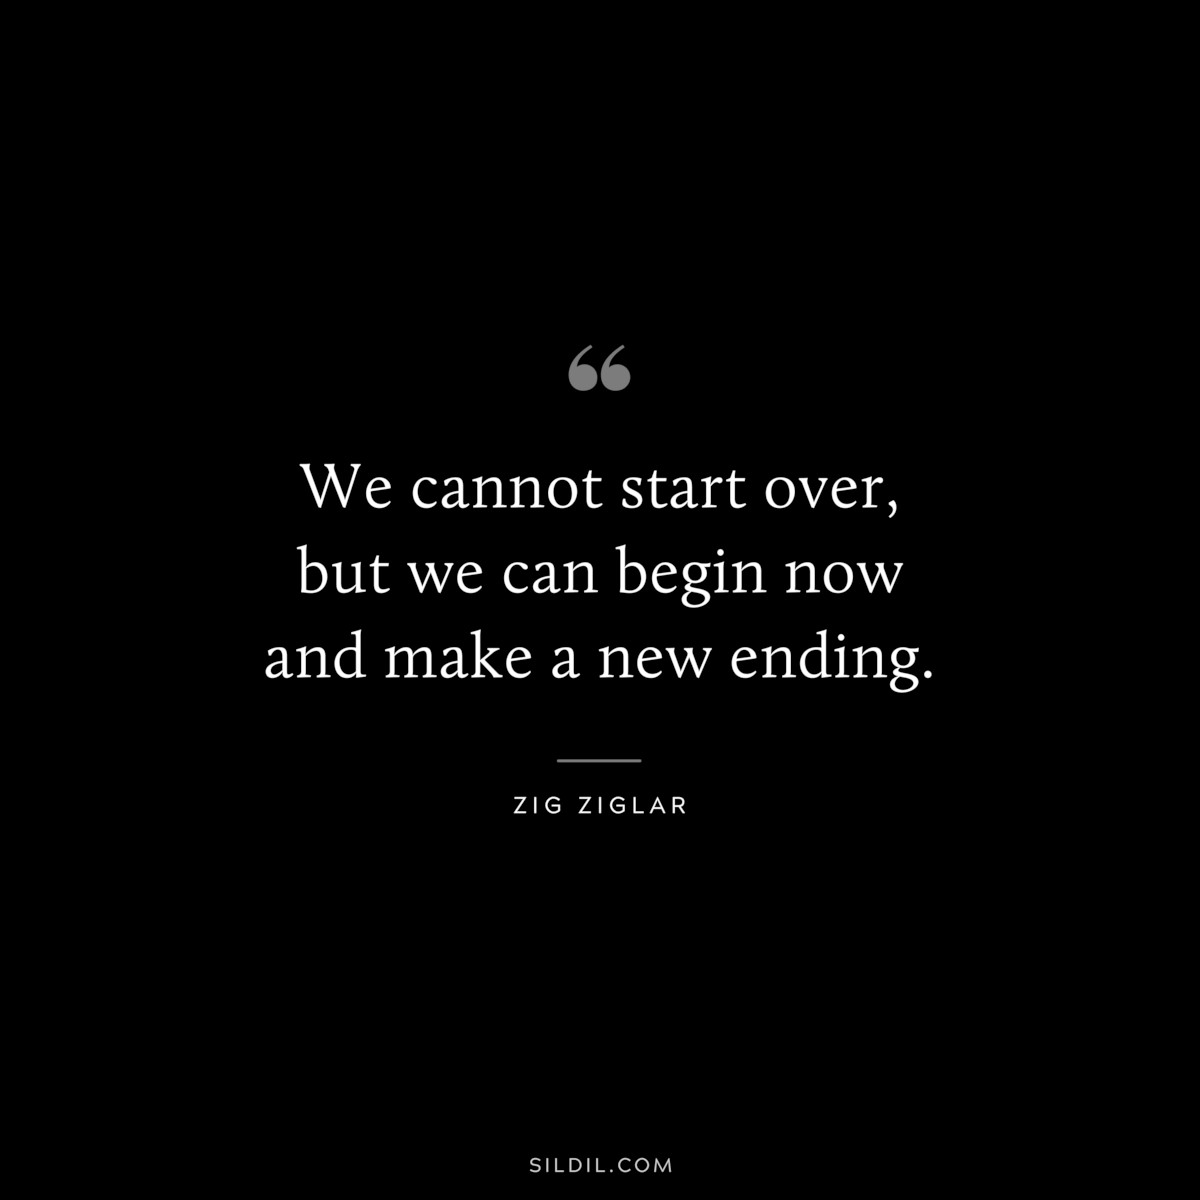 We cannot start over, but we can begin now and make a new ending. ― Zig Ziglar